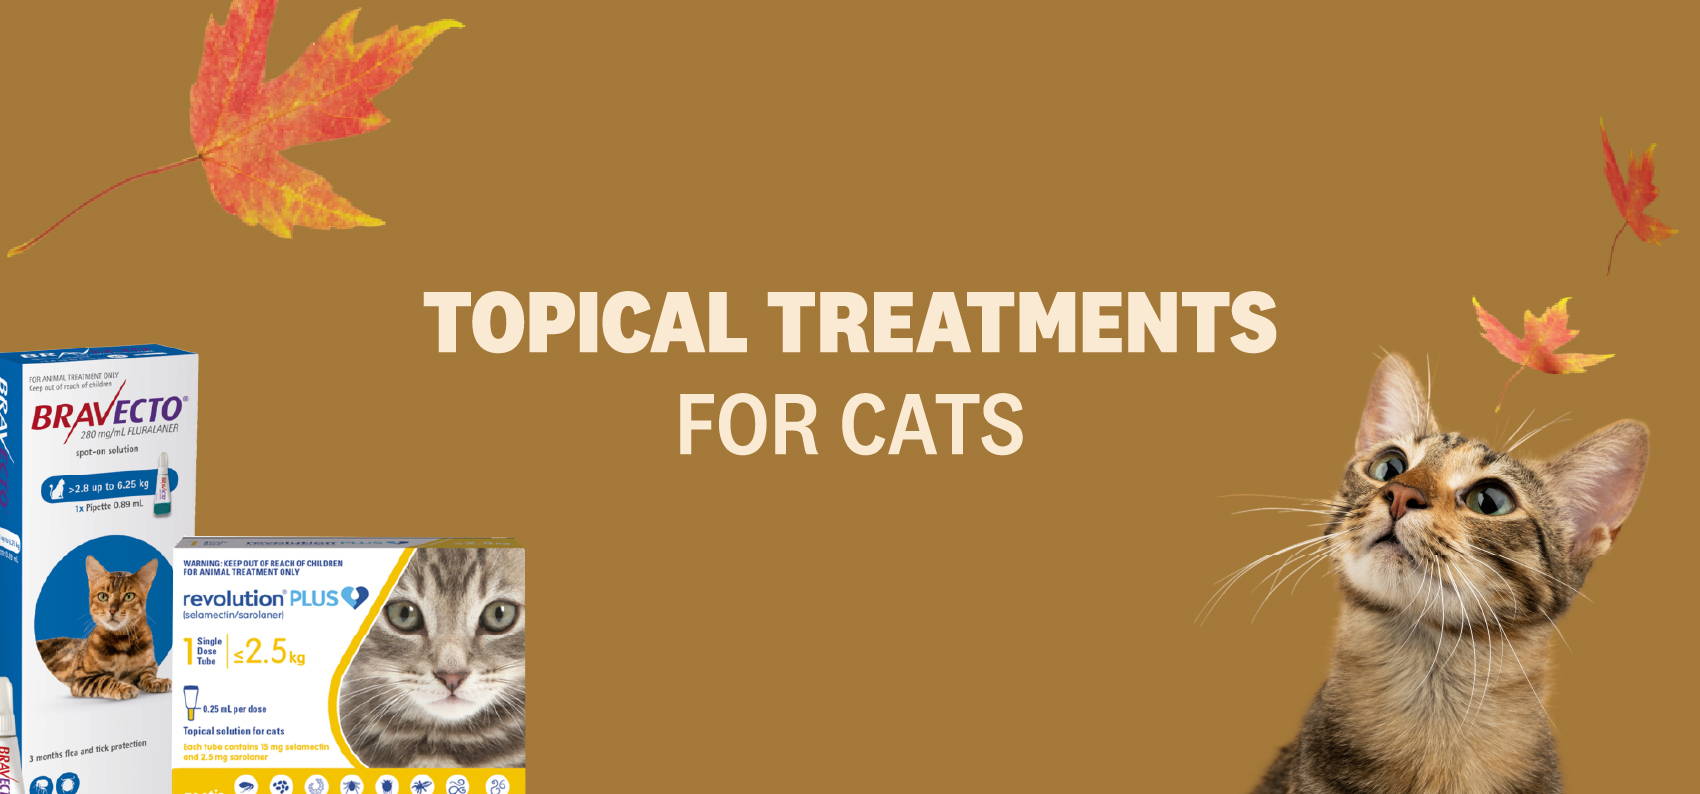 TOPICAL TREATMENTS FOR CATS